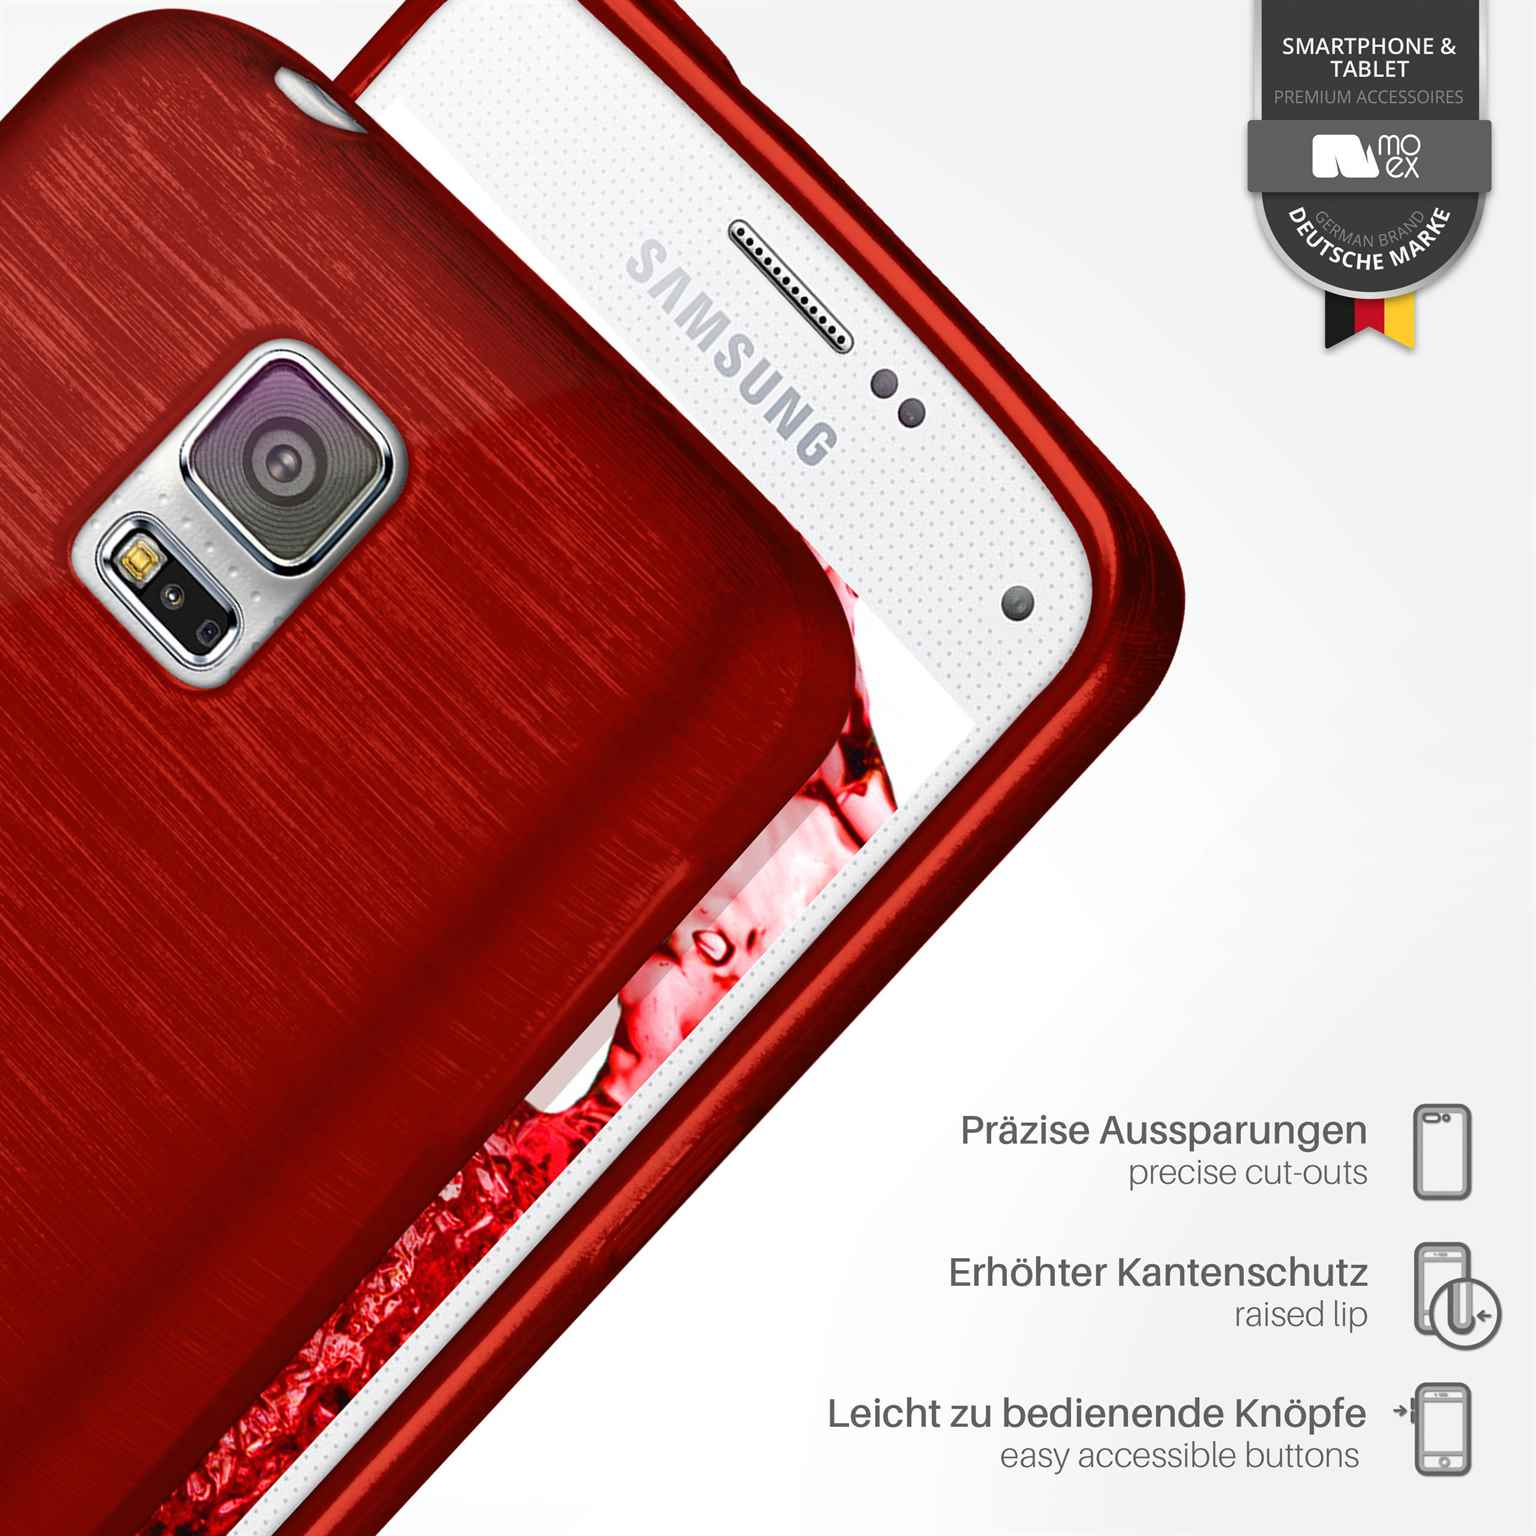 MOEX Brushed Case, Crimson-Red Samsung, Neo, S5 Galaxy Backcover